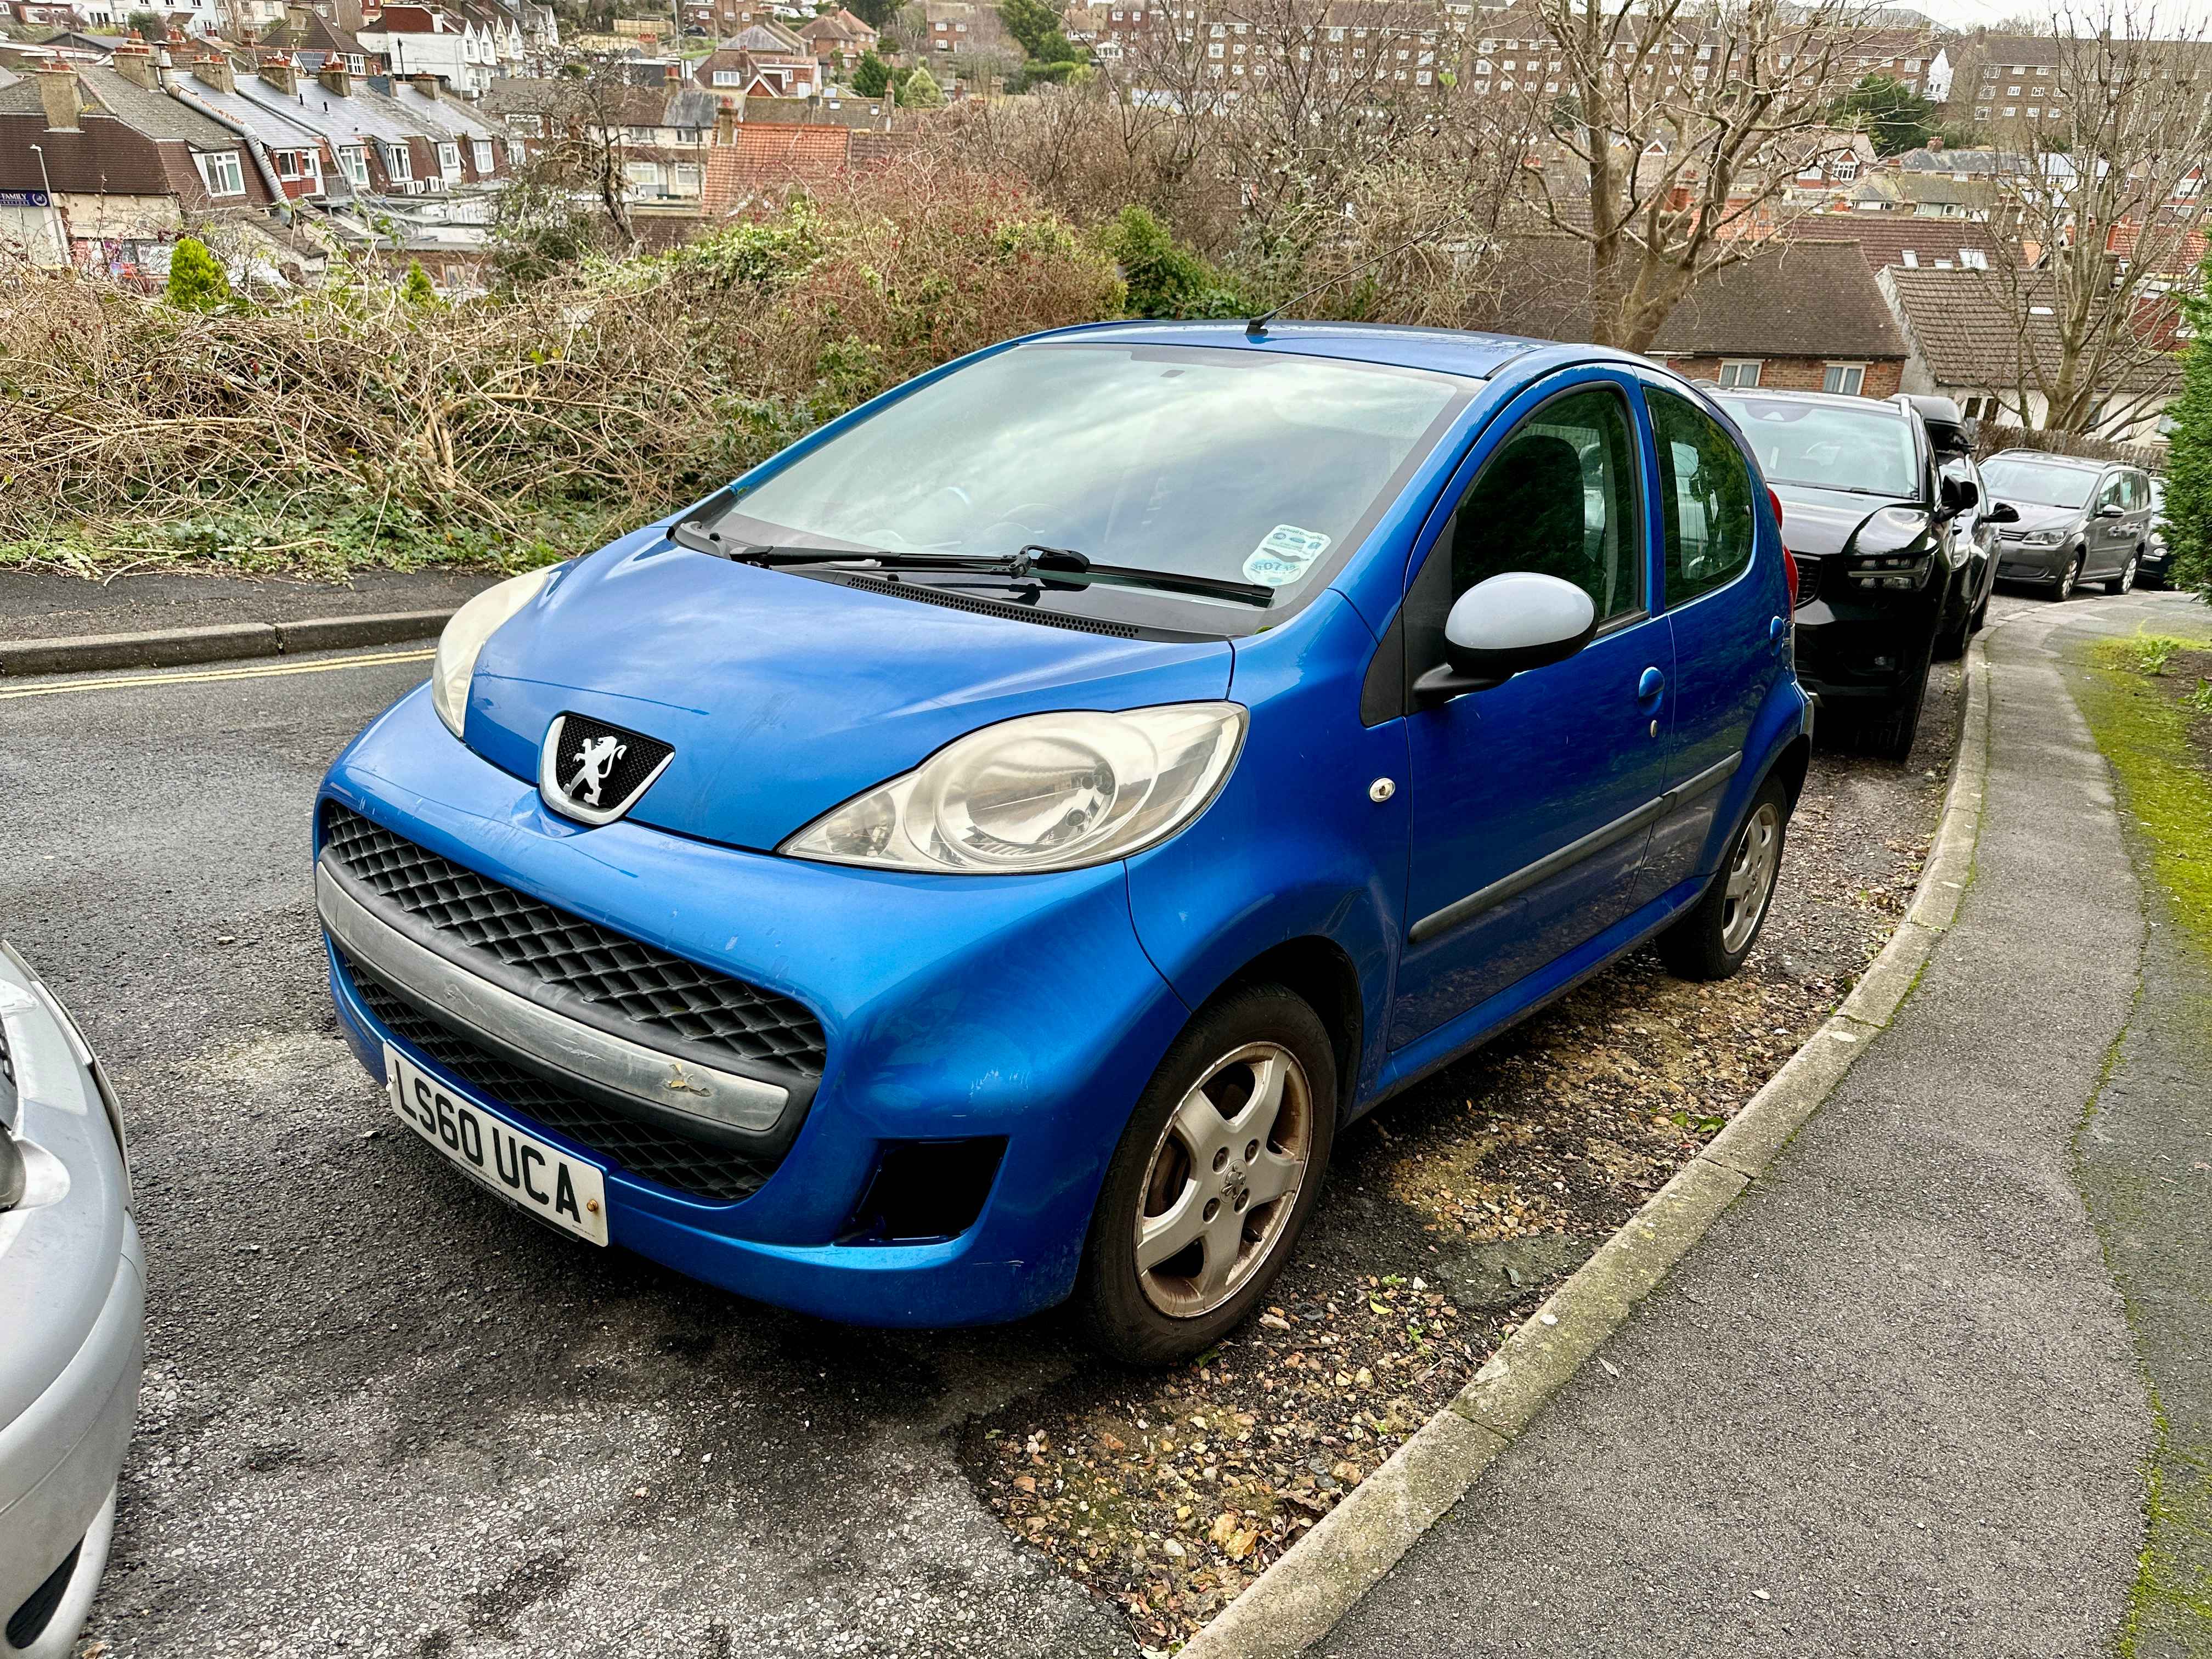 Photograph of LS60 UCA - a Blue Peugeot 107 parked in Hollingdean by a non-resident. The seventh of seven photographs supplied by the residents of Hollingdean.